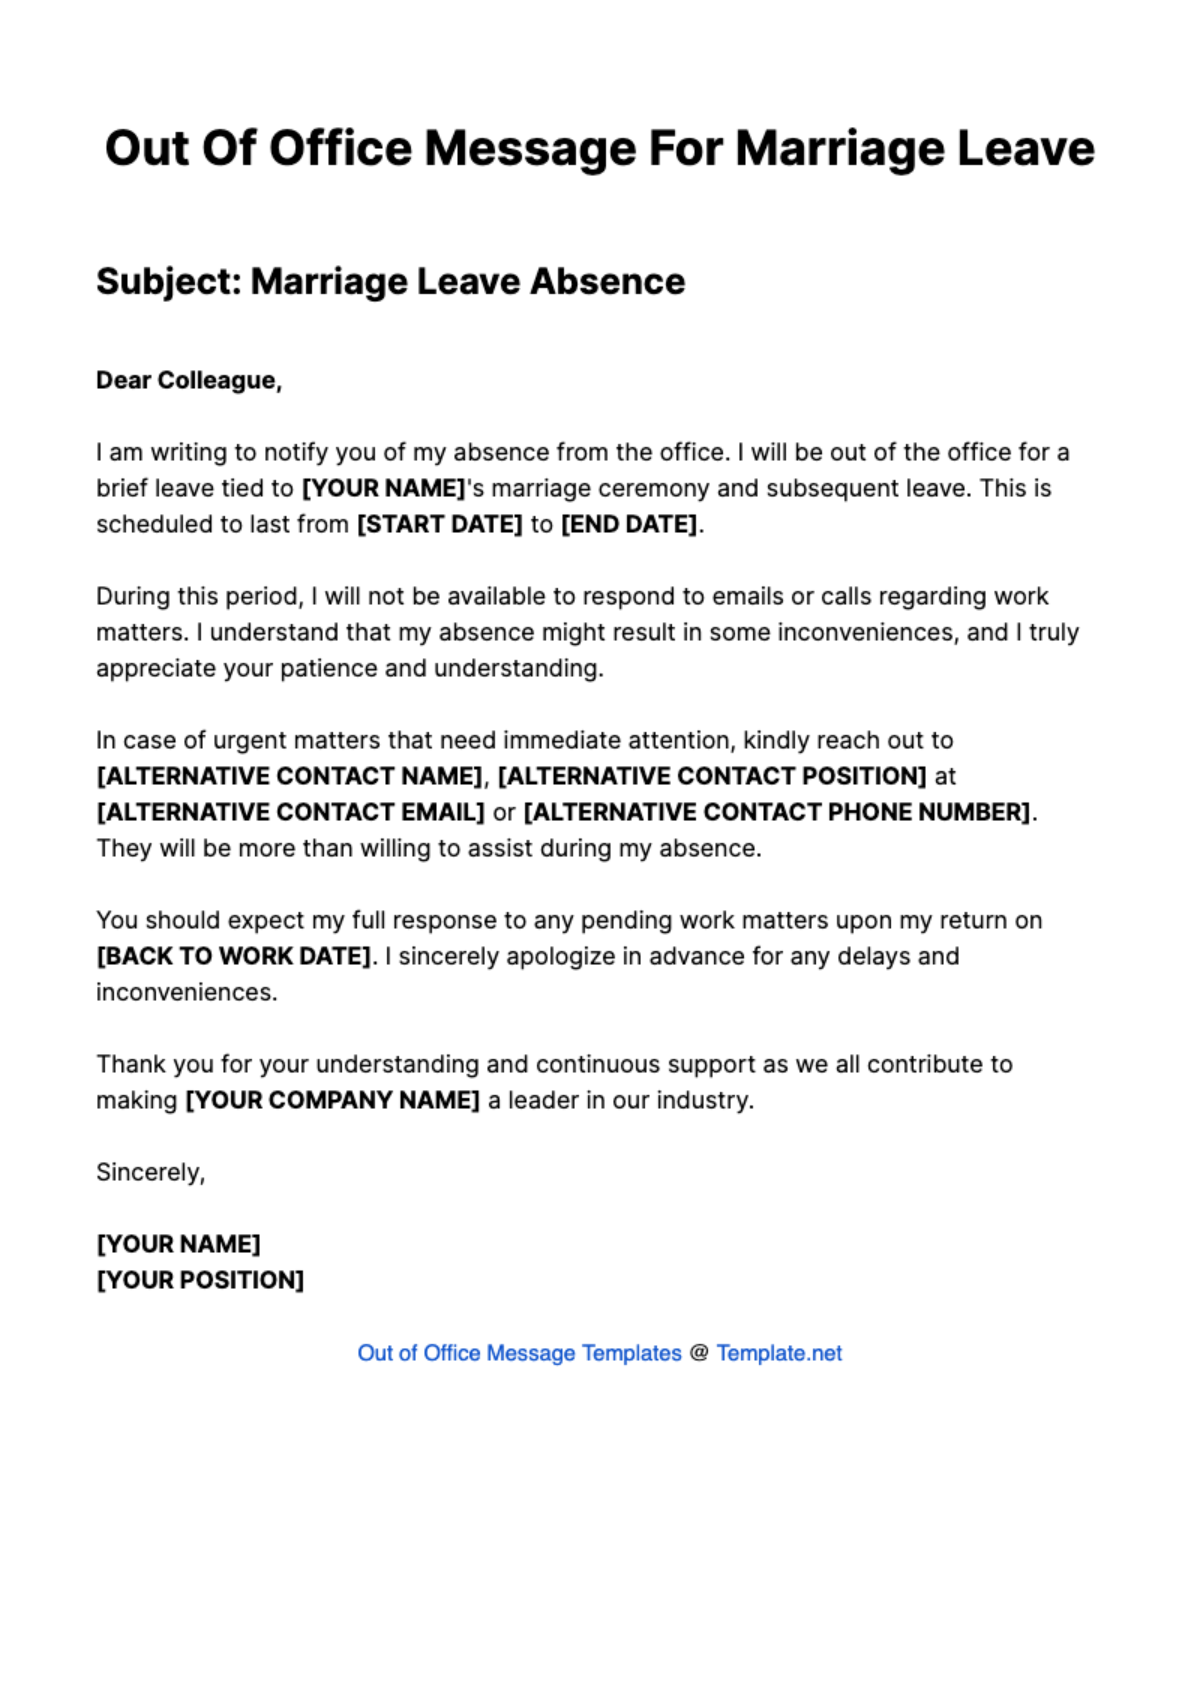 Out Of Office Message For Marriage Leave Template